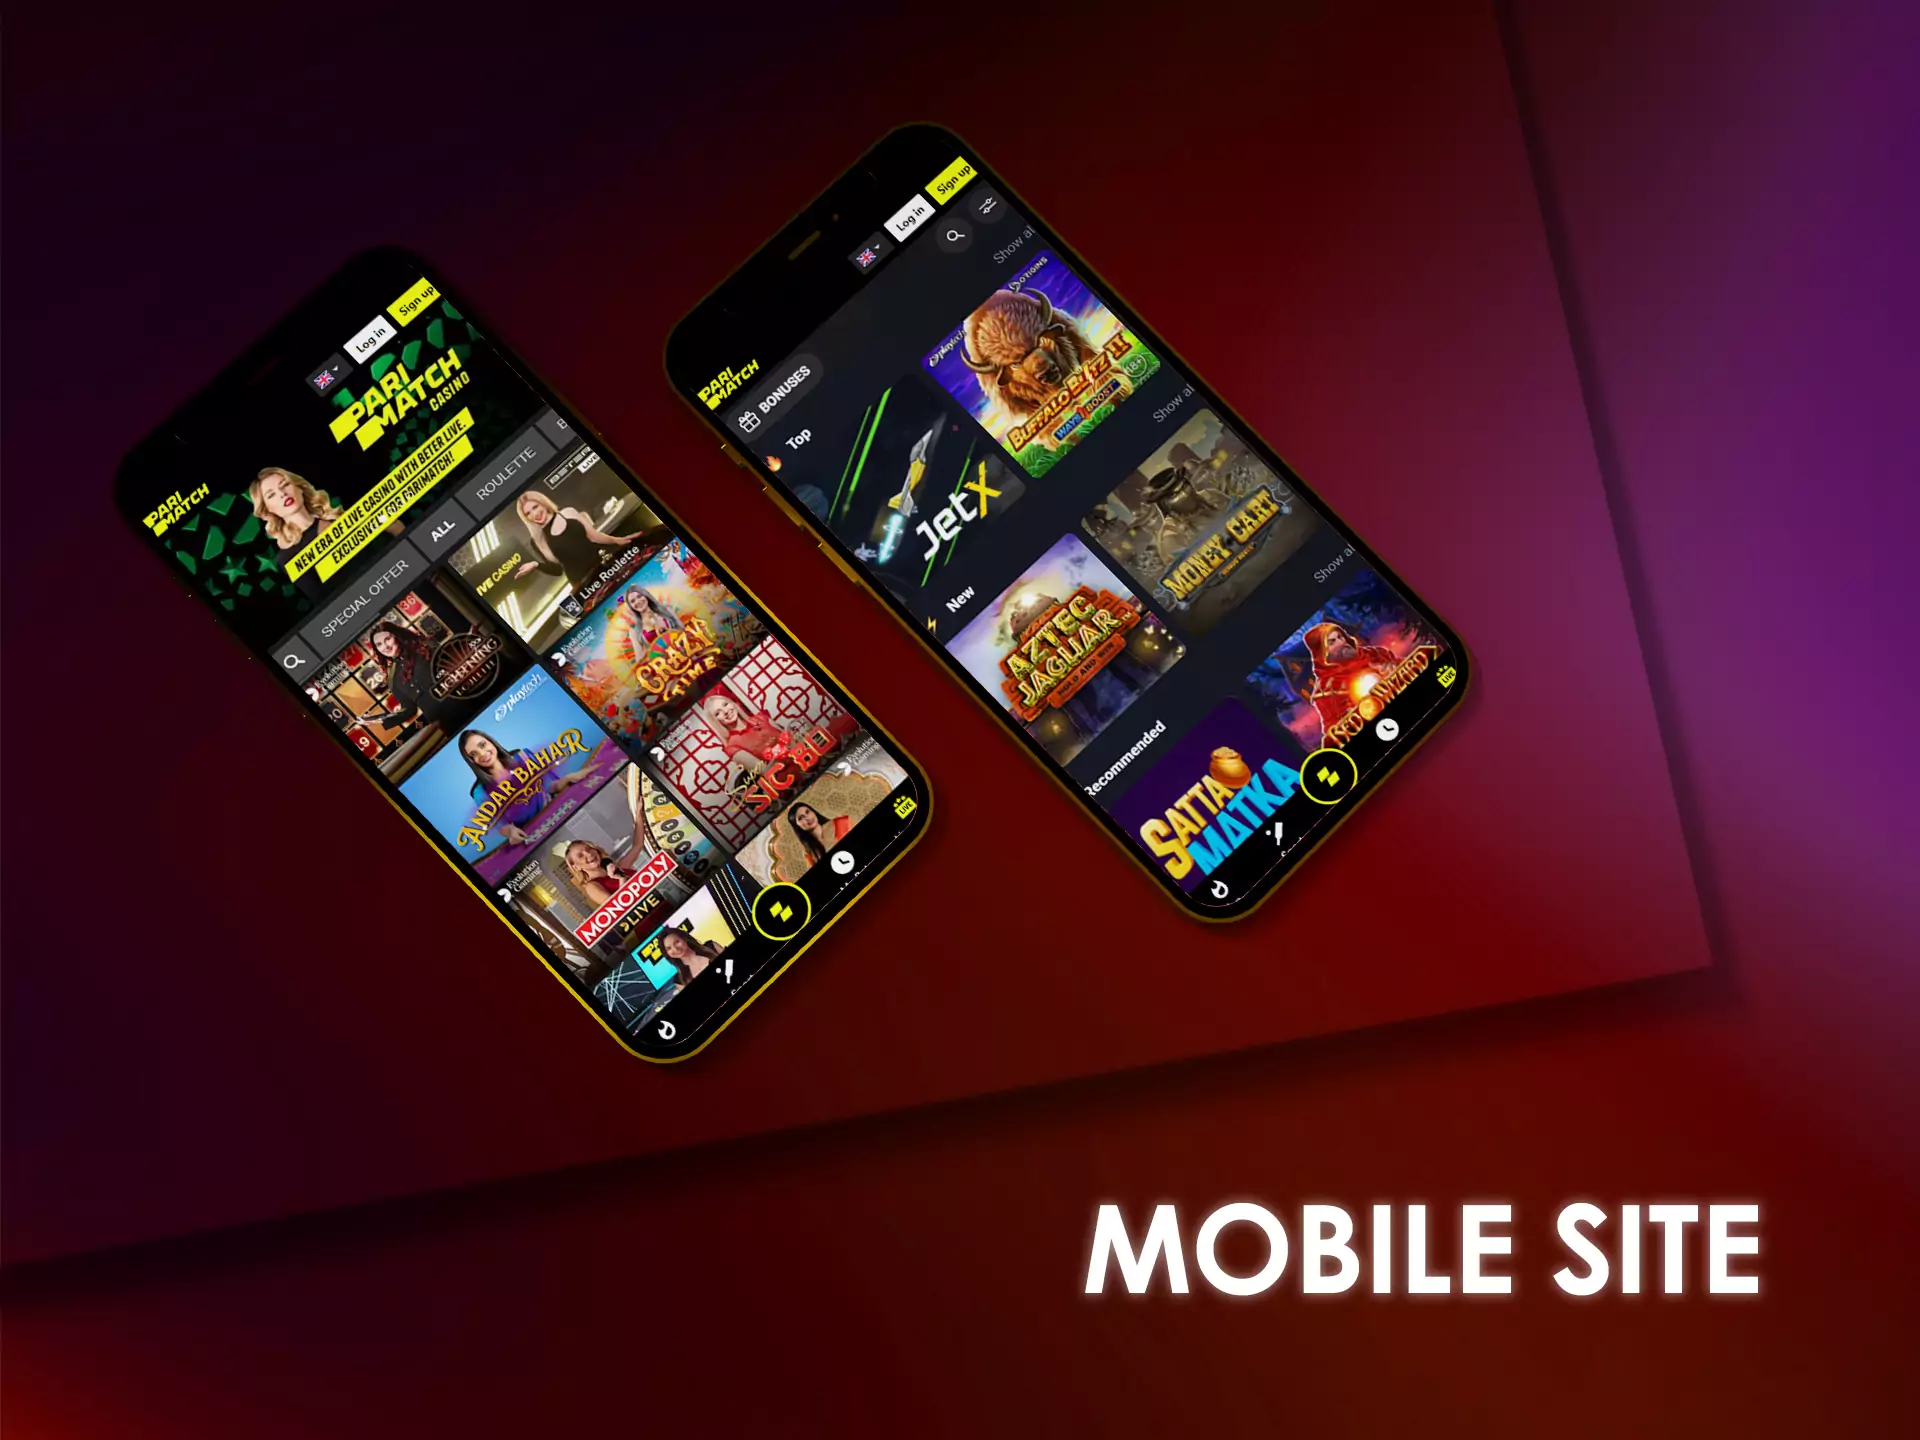 If you don't want to install the app, you can play slots and live games with the help of a browser version of the site.